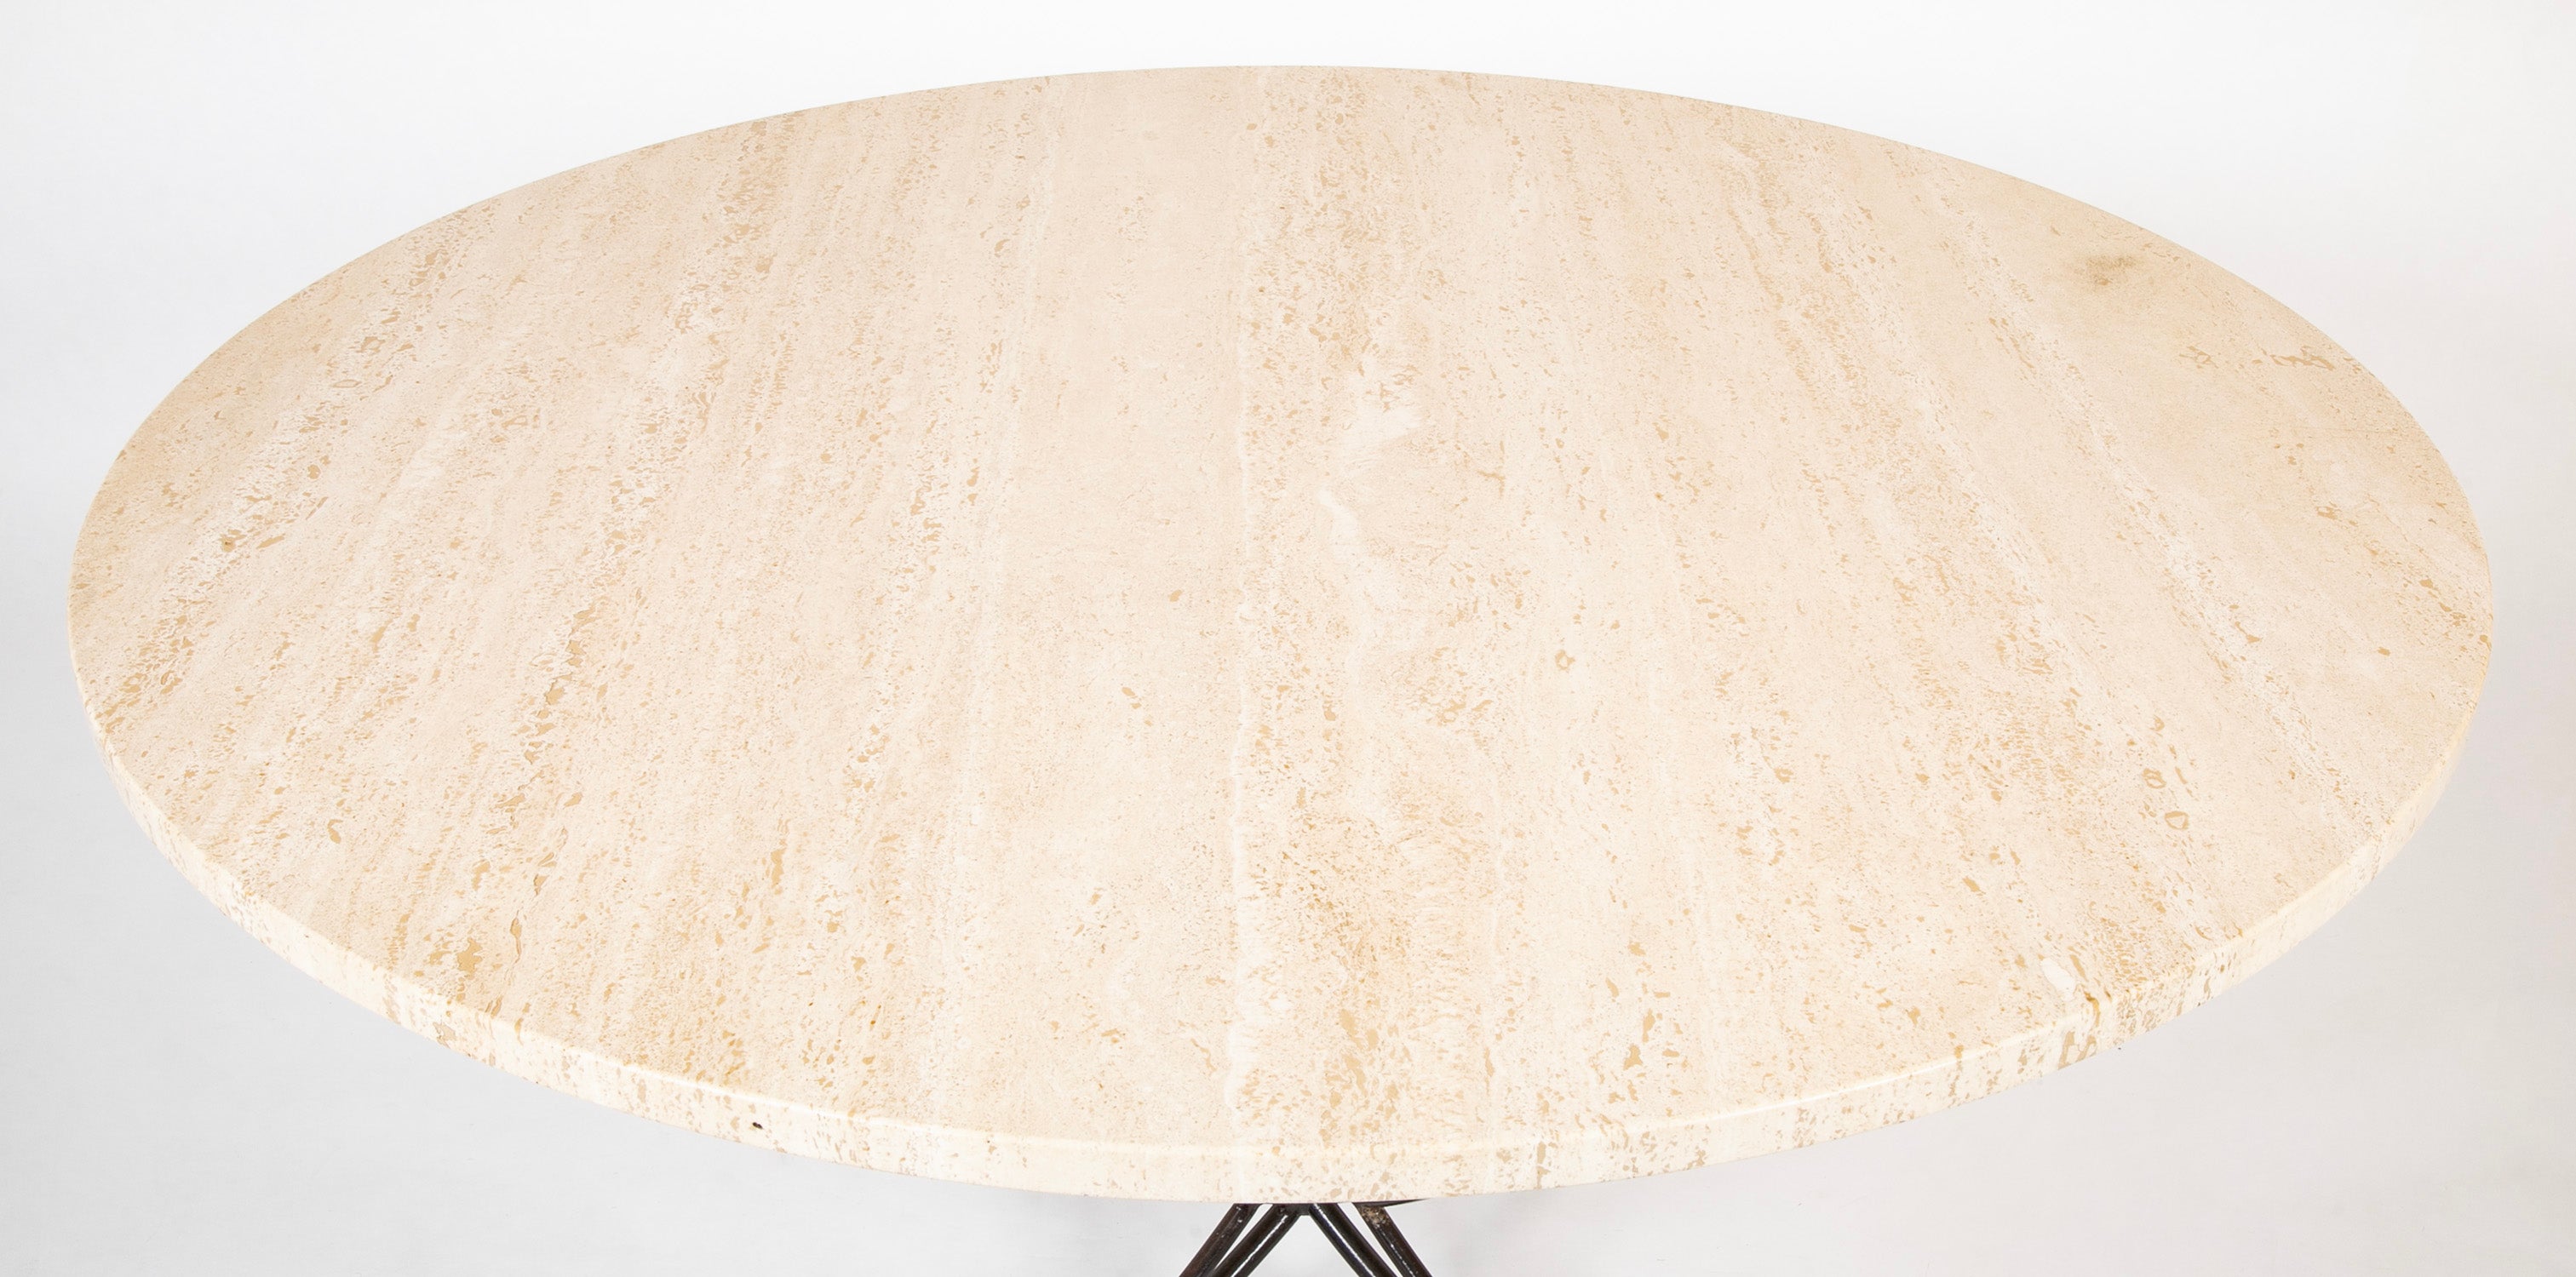 A French Round Marble Top Dining Table on Iron Base